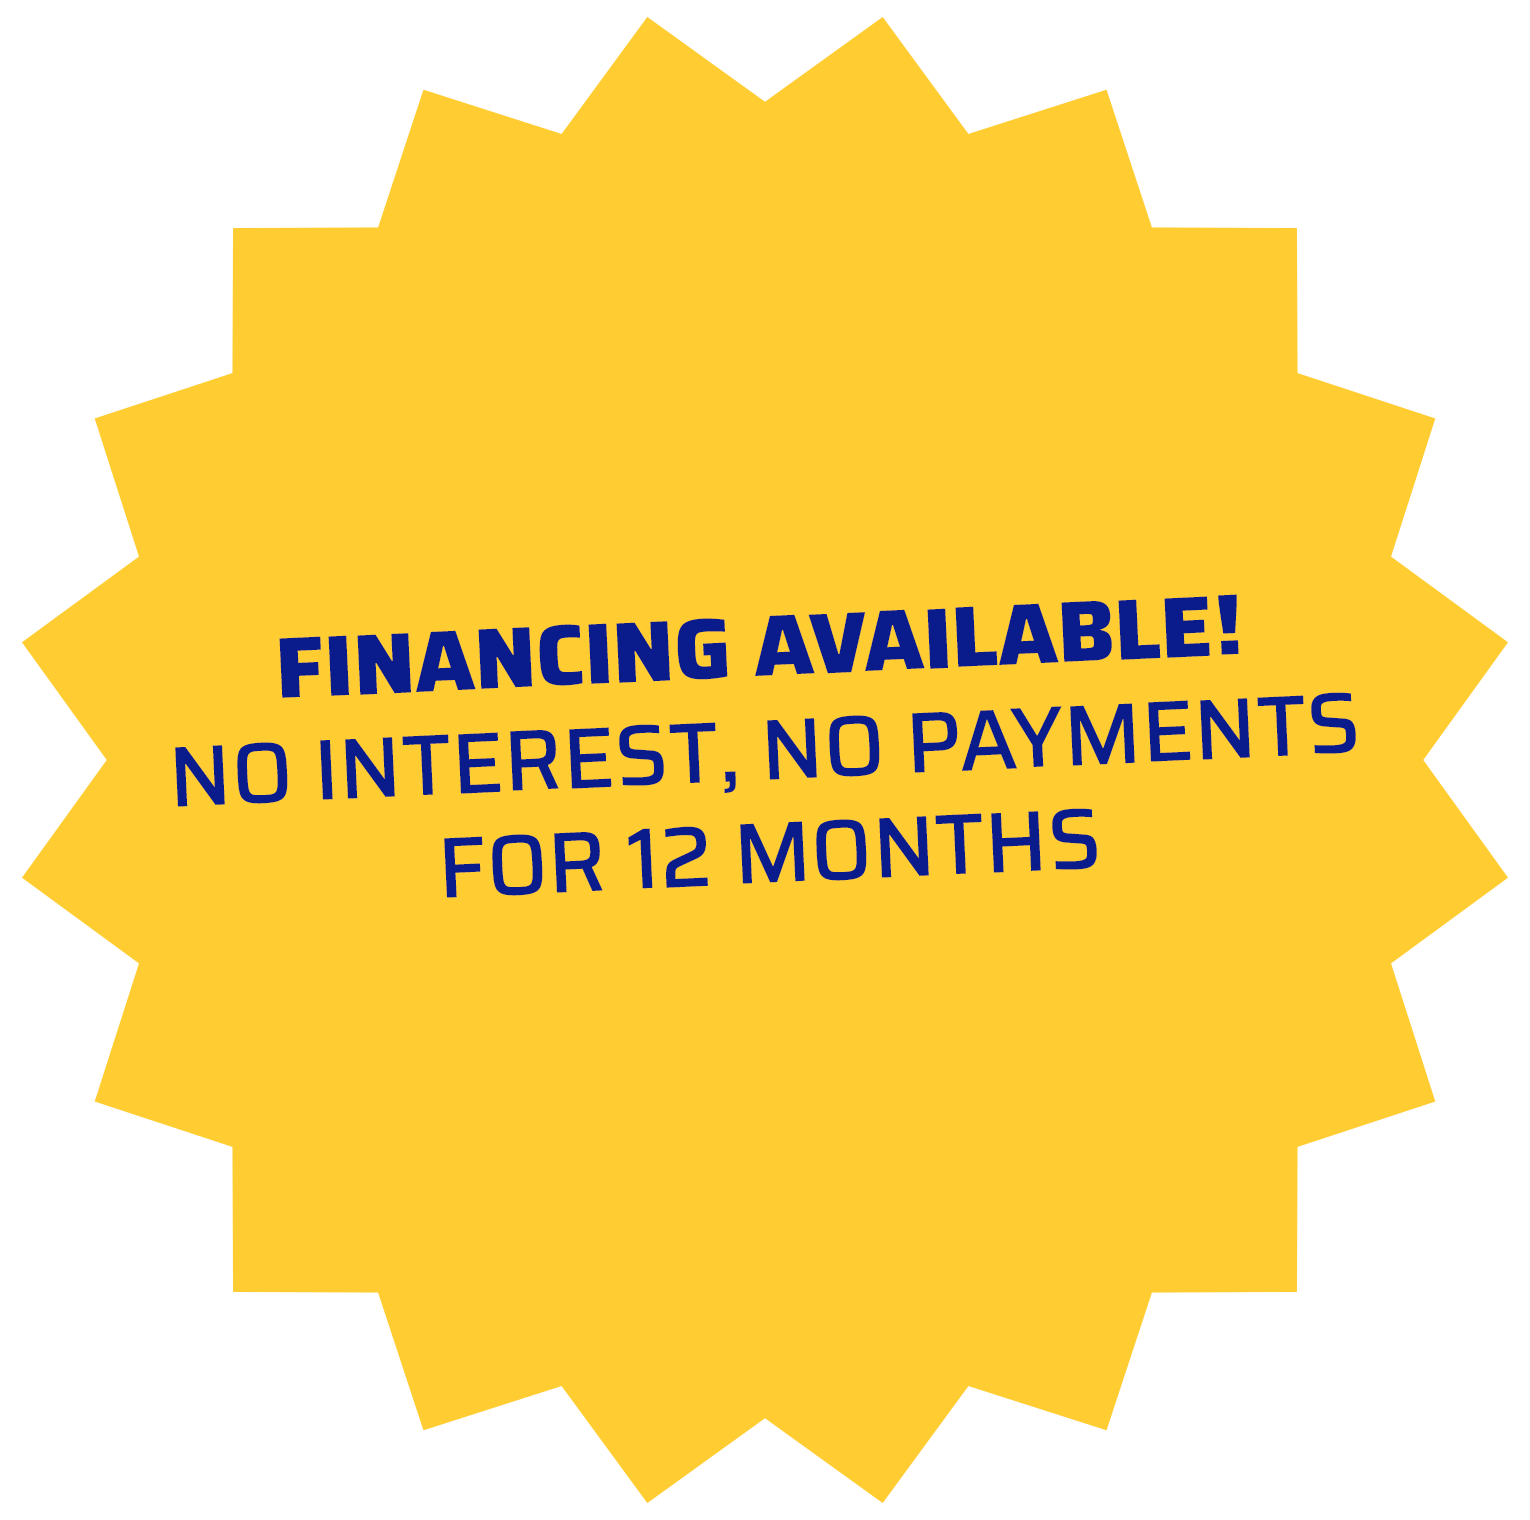 Financing Available graphic